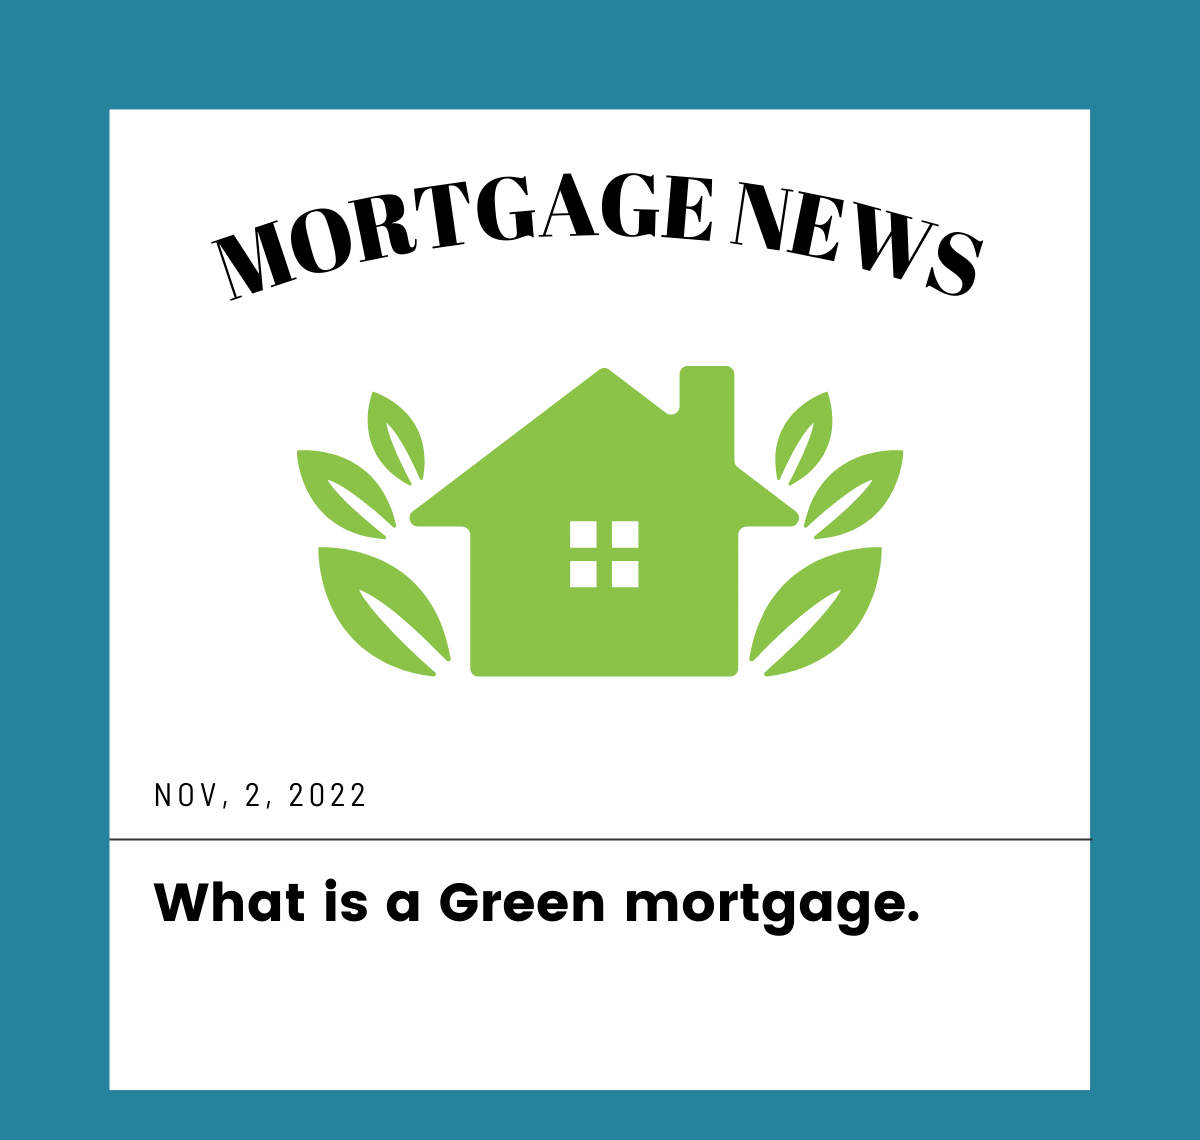 What is a green mortgage?